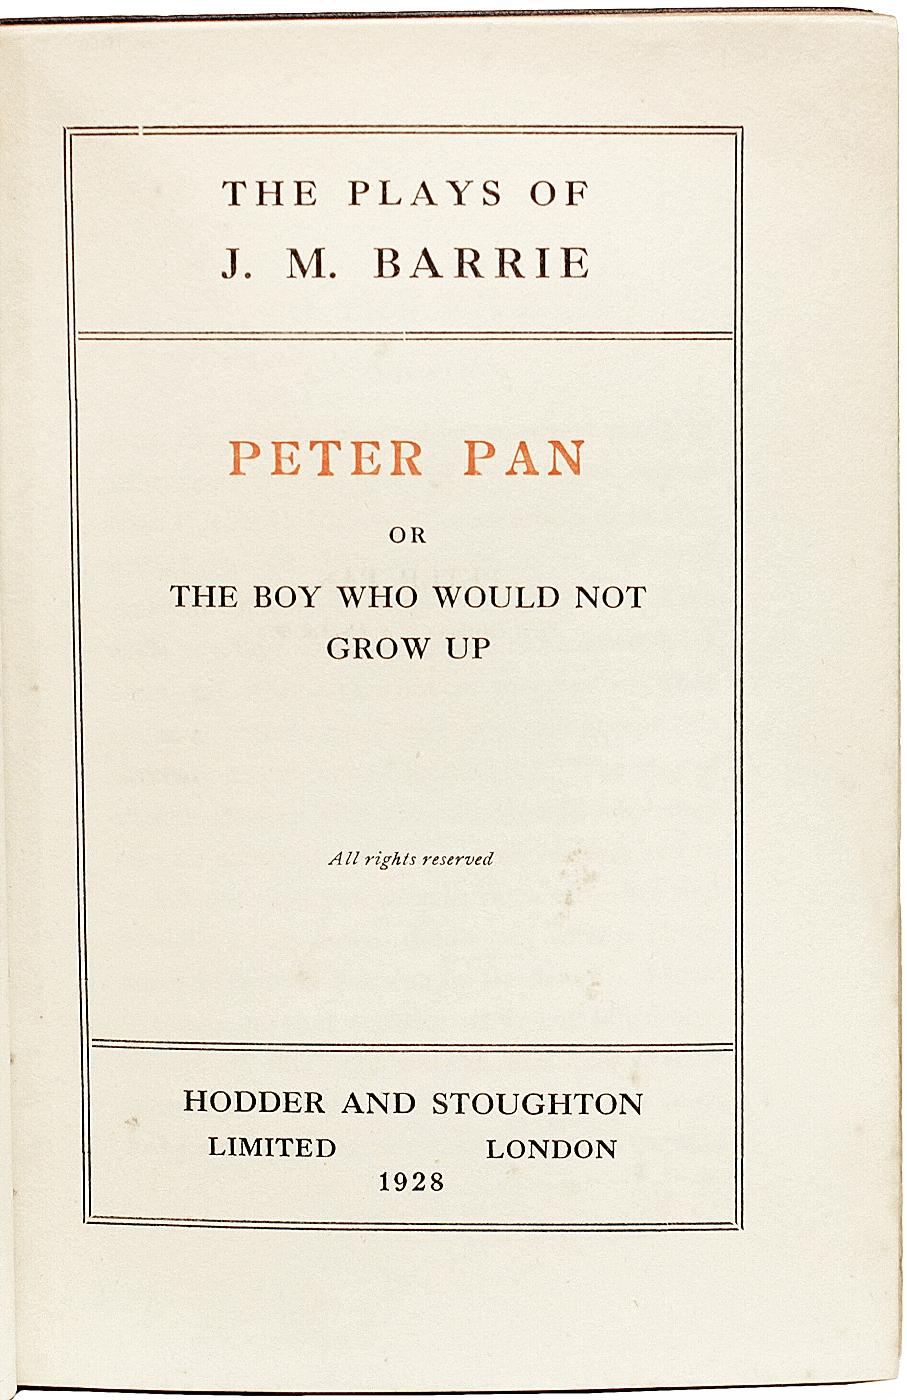 British J. M. BARRIE - Peter Pan - FIRST PLAY EDITION - AN IMPORTANT PRESENTATION COPY